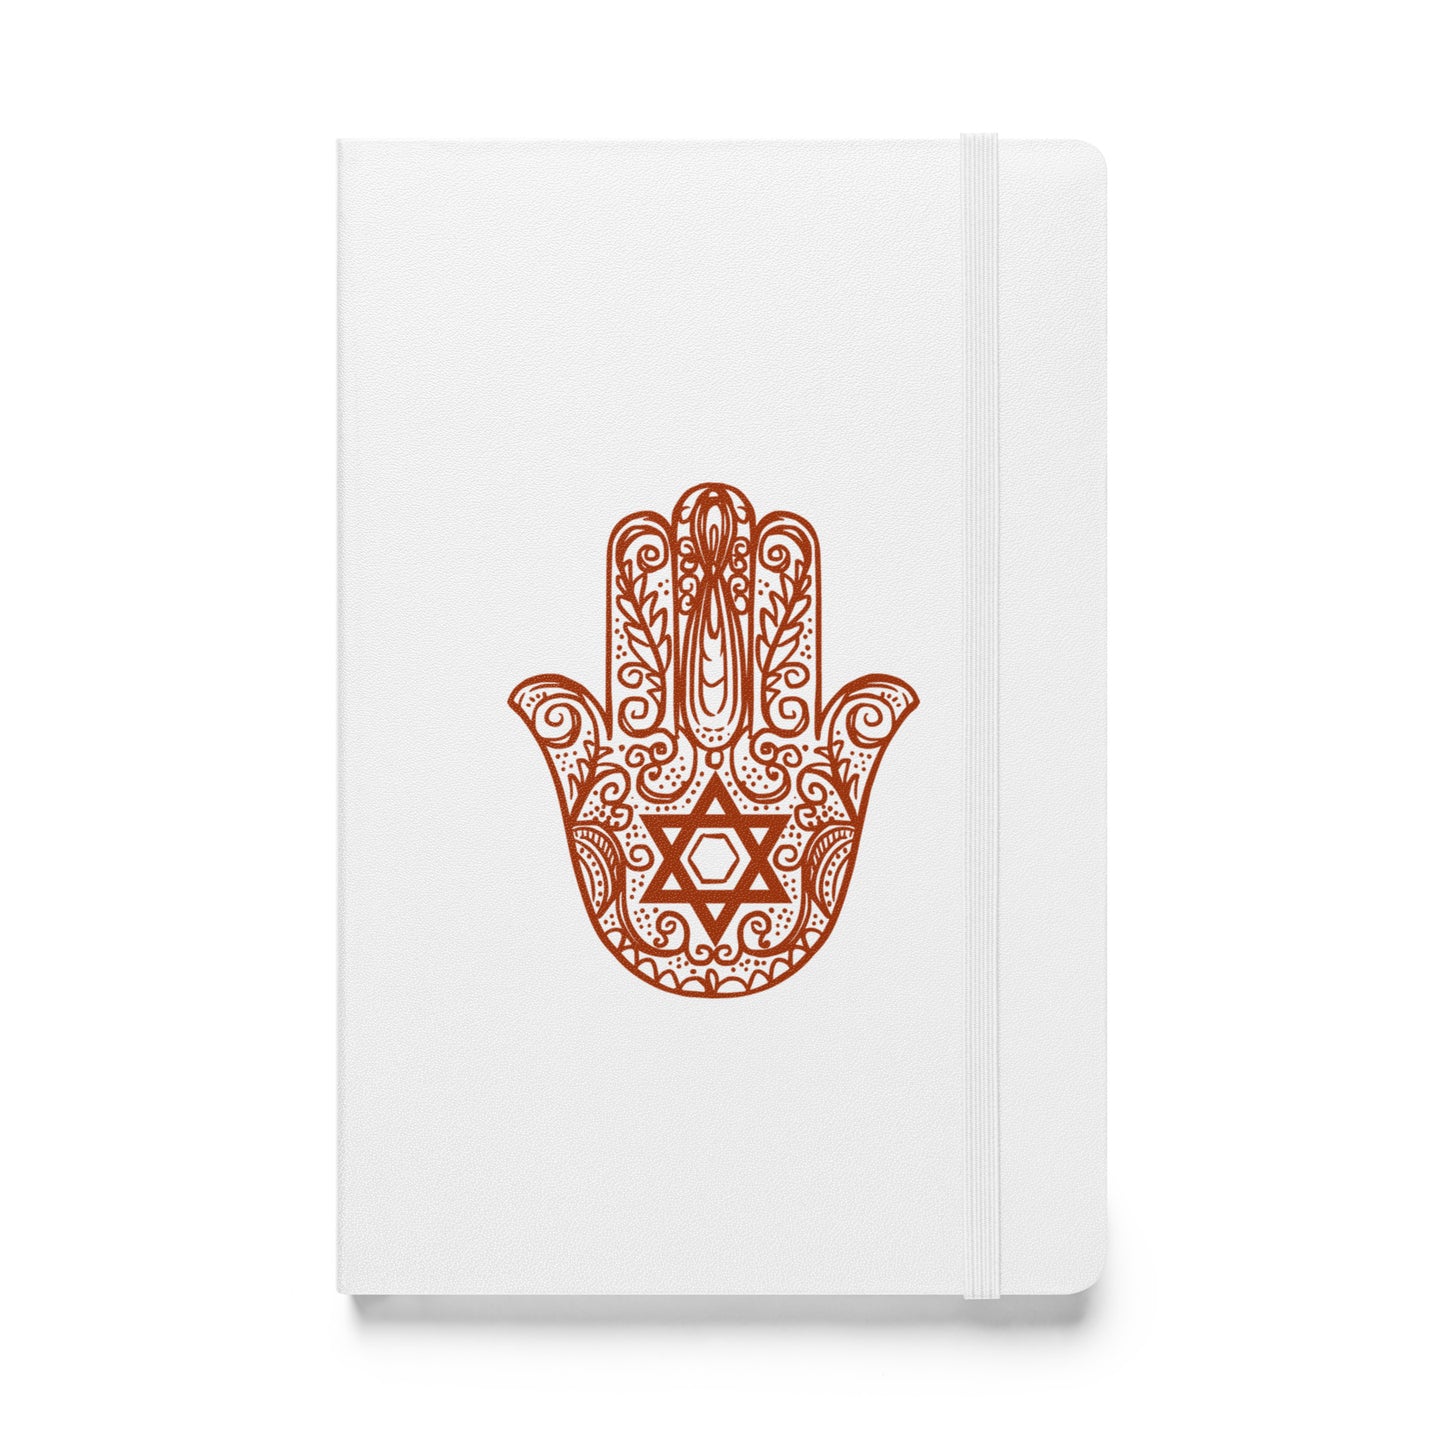 The Tales of Israel notebook